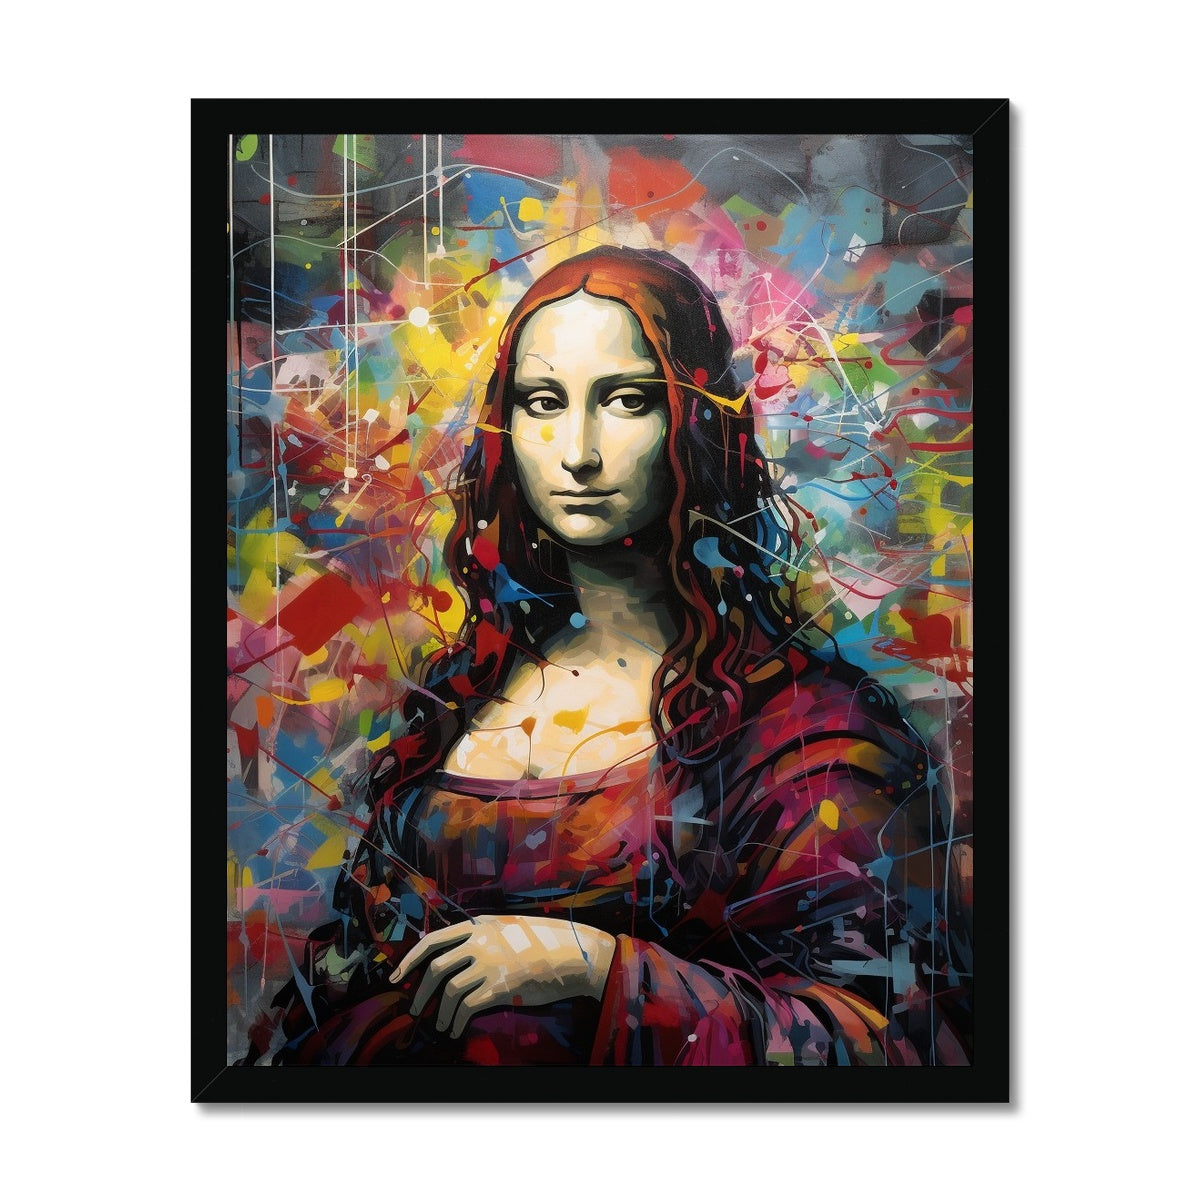 Mona Lisa Meets "Just Stop Oil": Limited Edition Framed Print